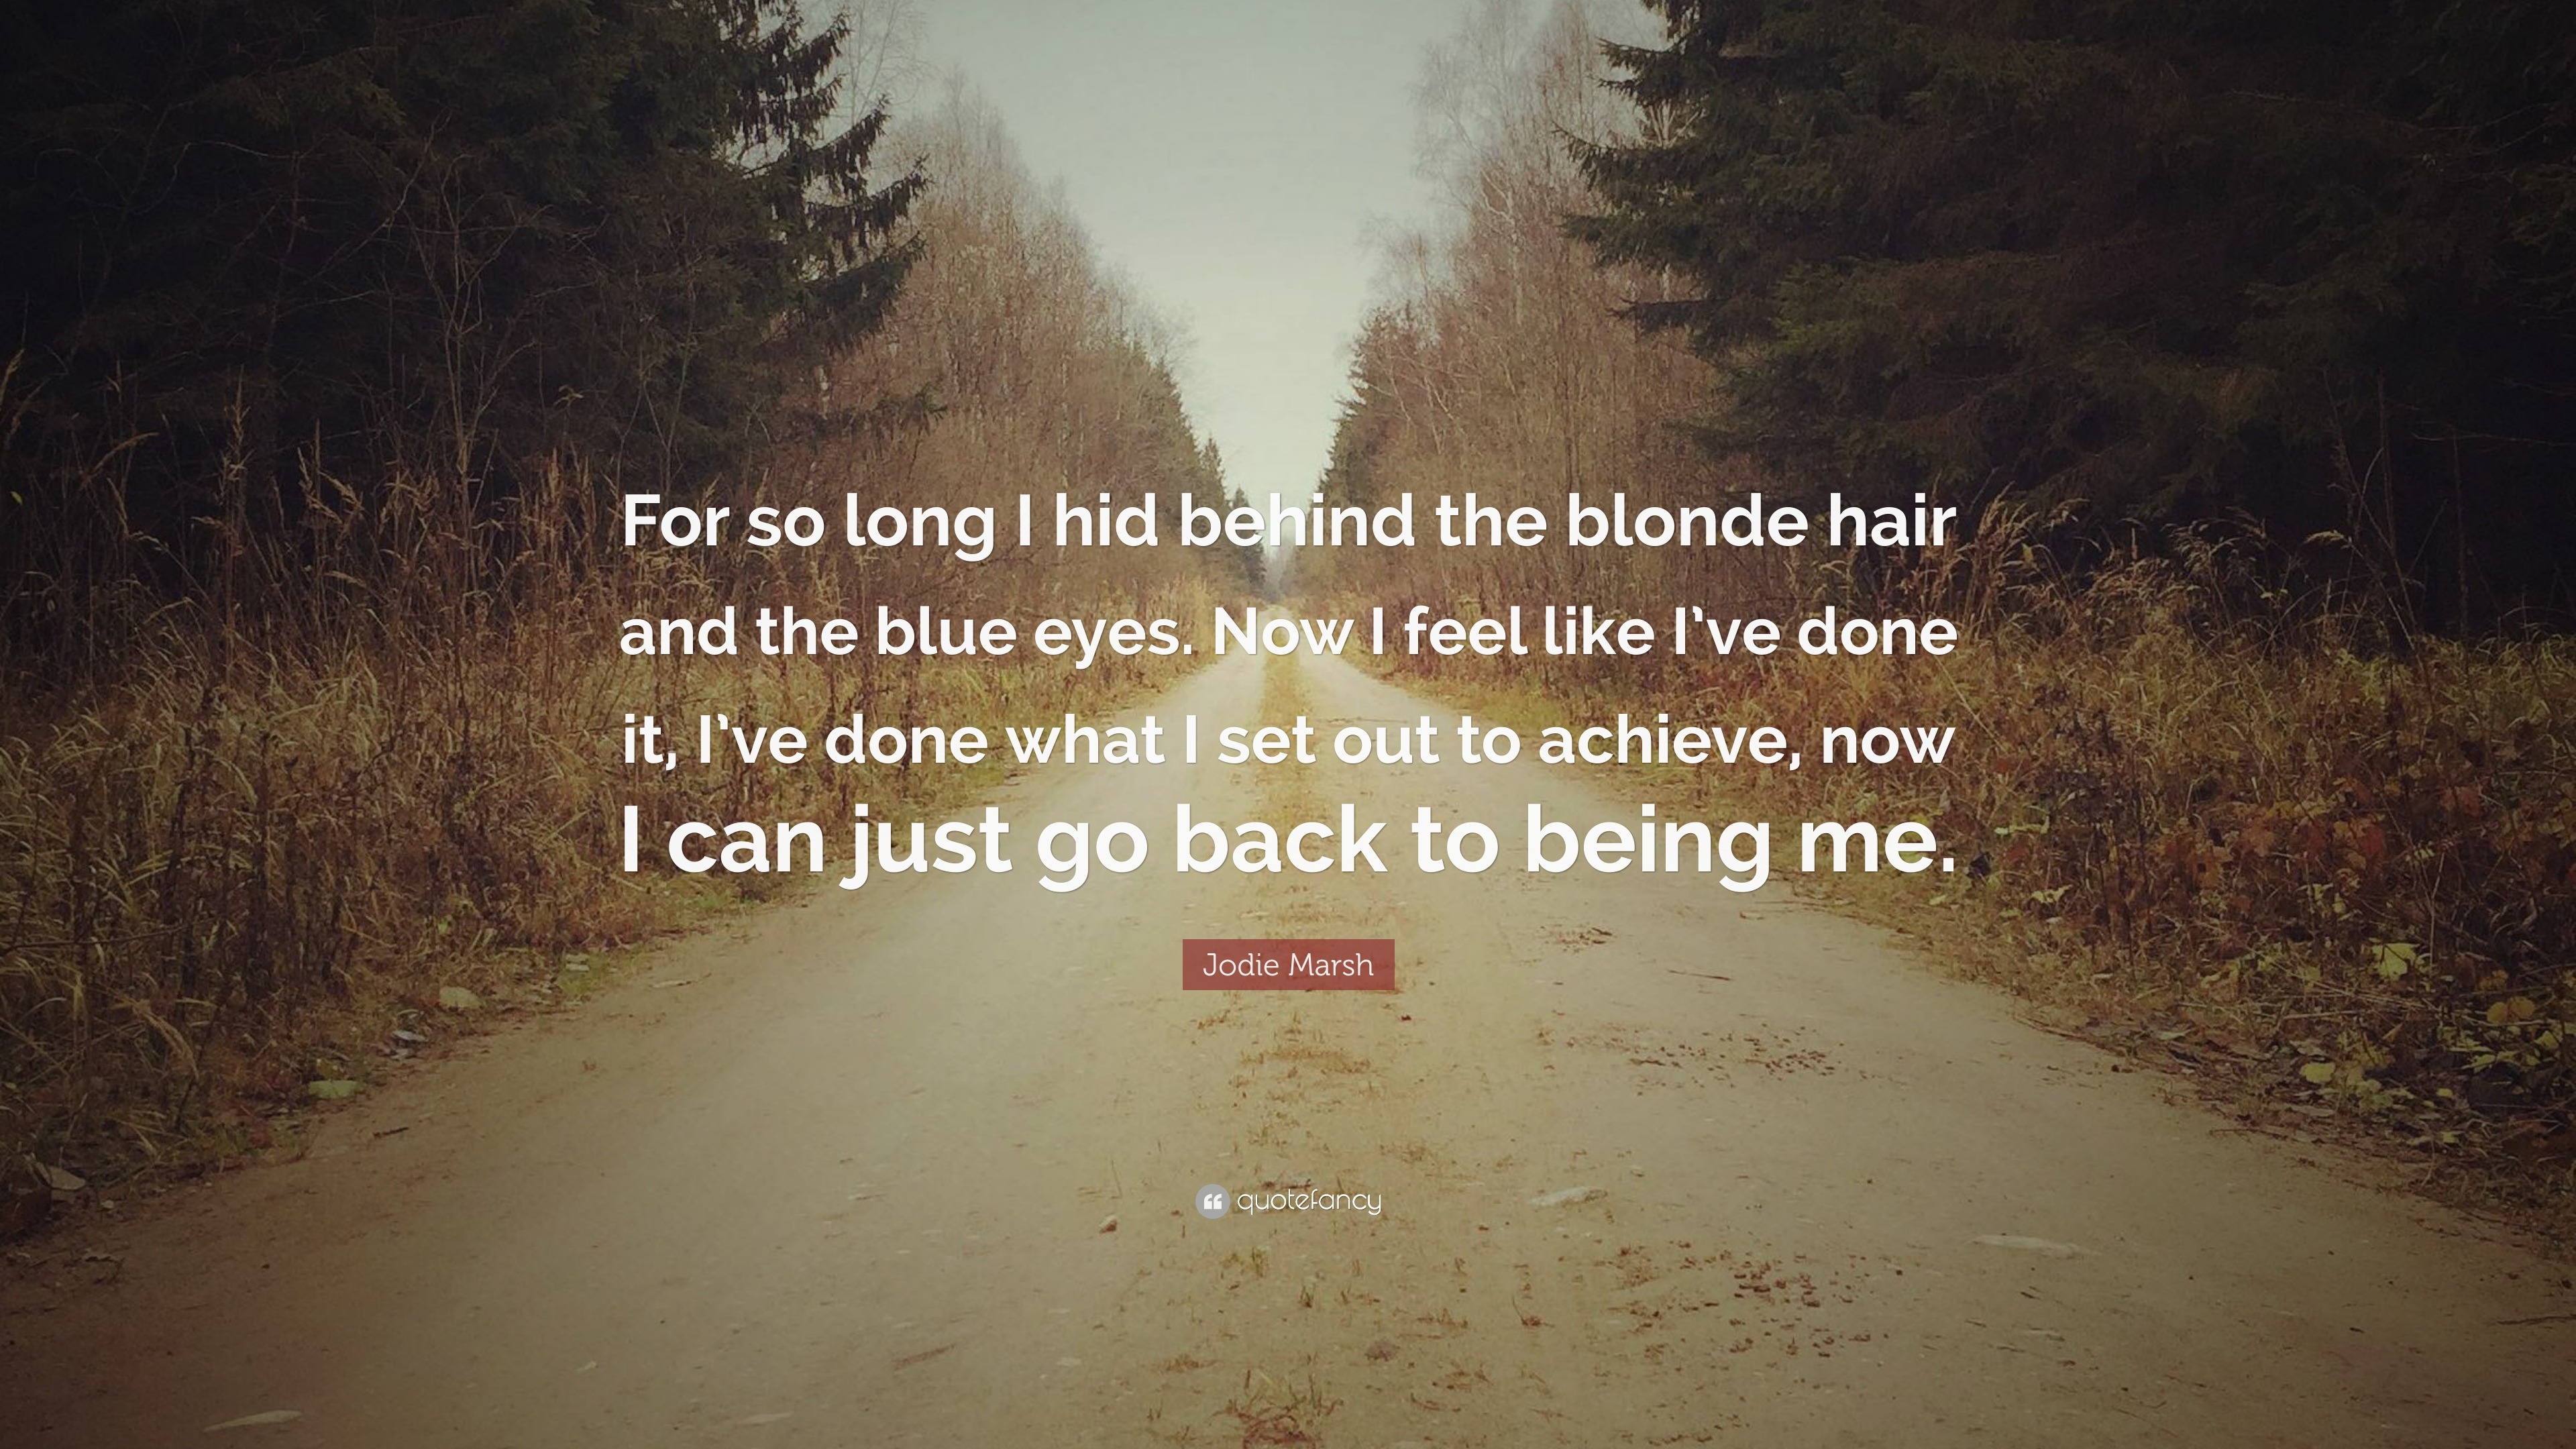 7. "Blonde Hair Quotes" by Goodreads - wide 6